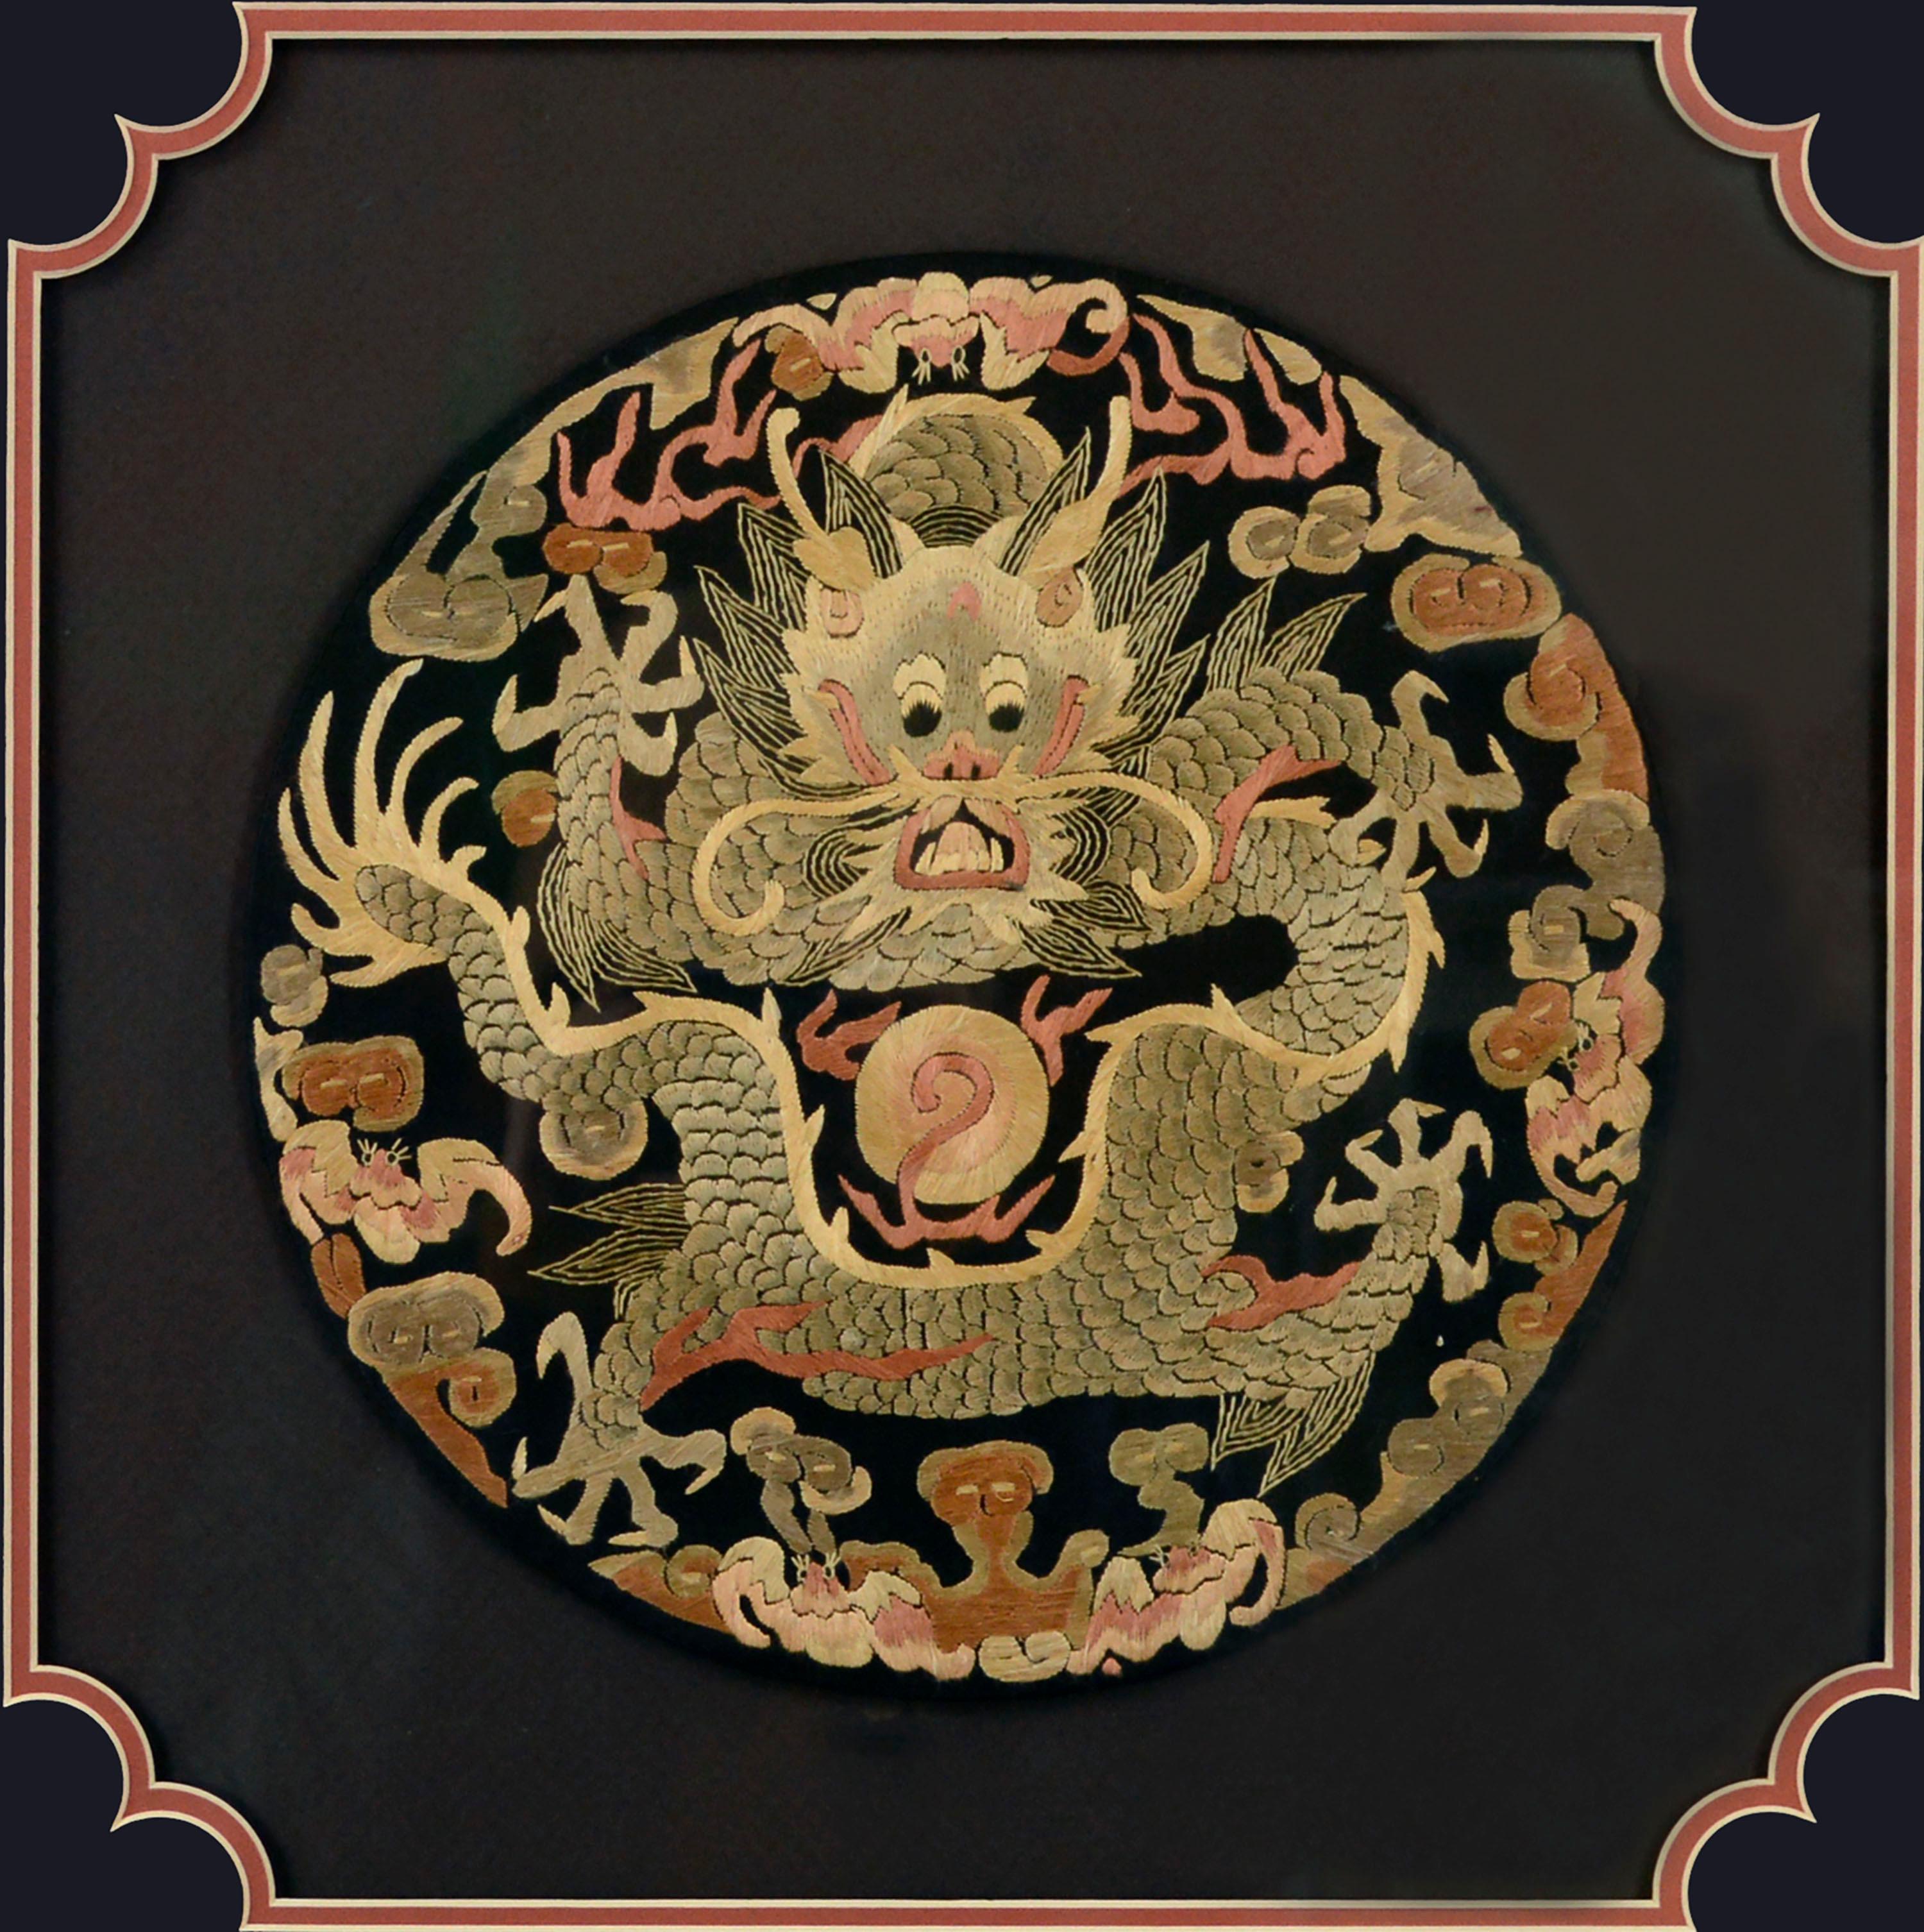 Late 19th century Chinese silk embroidery rank badge textile, with a finely detailed dragon along with other various symbols embroidered with light yellow, tan, rust orange, and light red thread on a black background. The dragon's claws are each